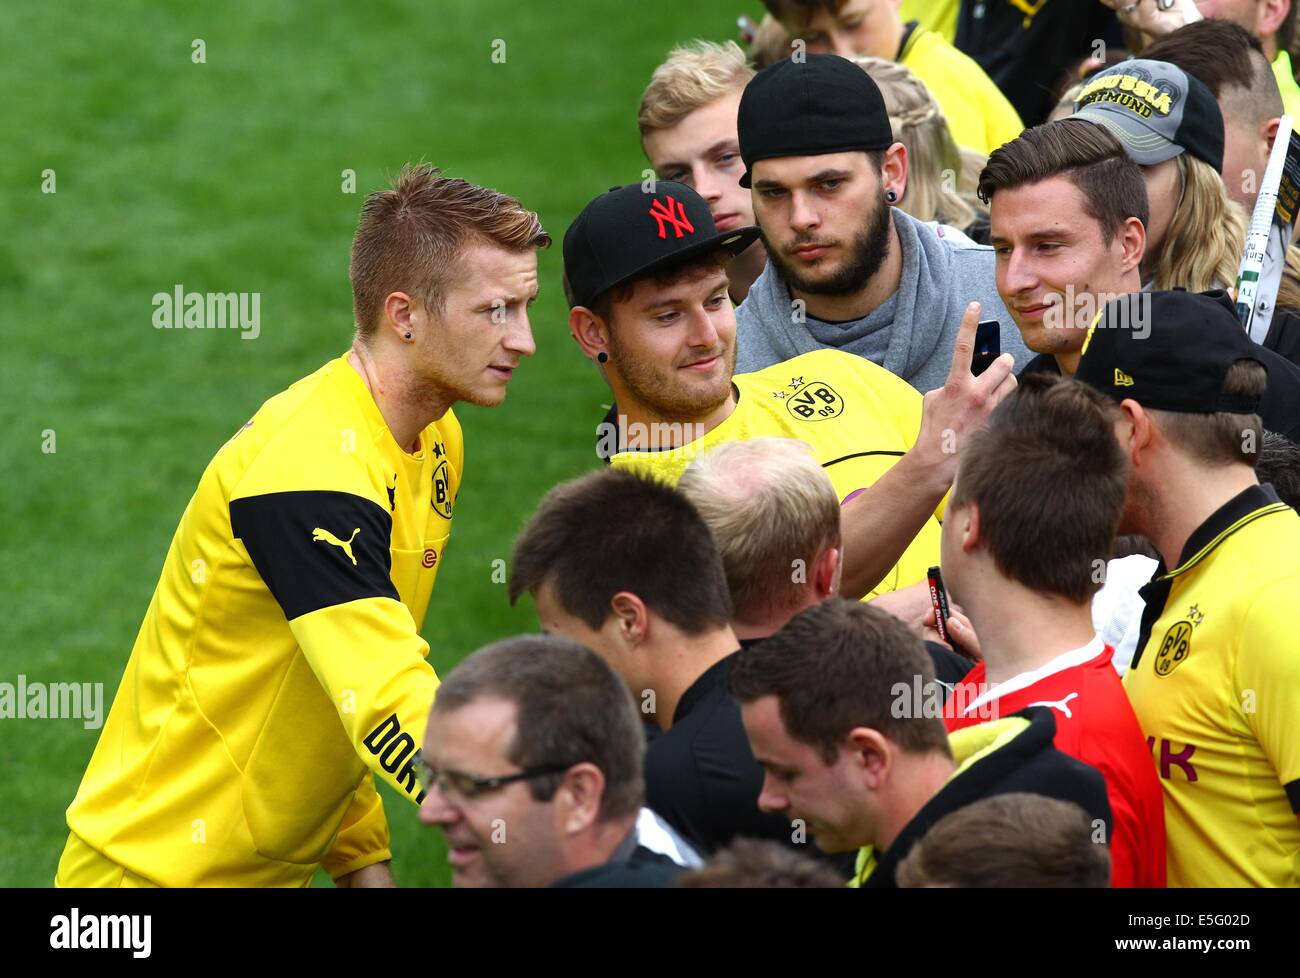 Bad Ragaz, Switzerland. 30th July, 2014. Marco Reus of Borussia Dortmund poses for photographs with fans after the training of Borussia Dortmund in Bad Ragaz, Switzerland, 30 July 2014. The Bundesliga team prepares in a training camp in Bad Ragaz for the next season until 06 August 2014. Photo: Karl-Josef Hildenbrand/dpa/Alamy Live News Stock Photo